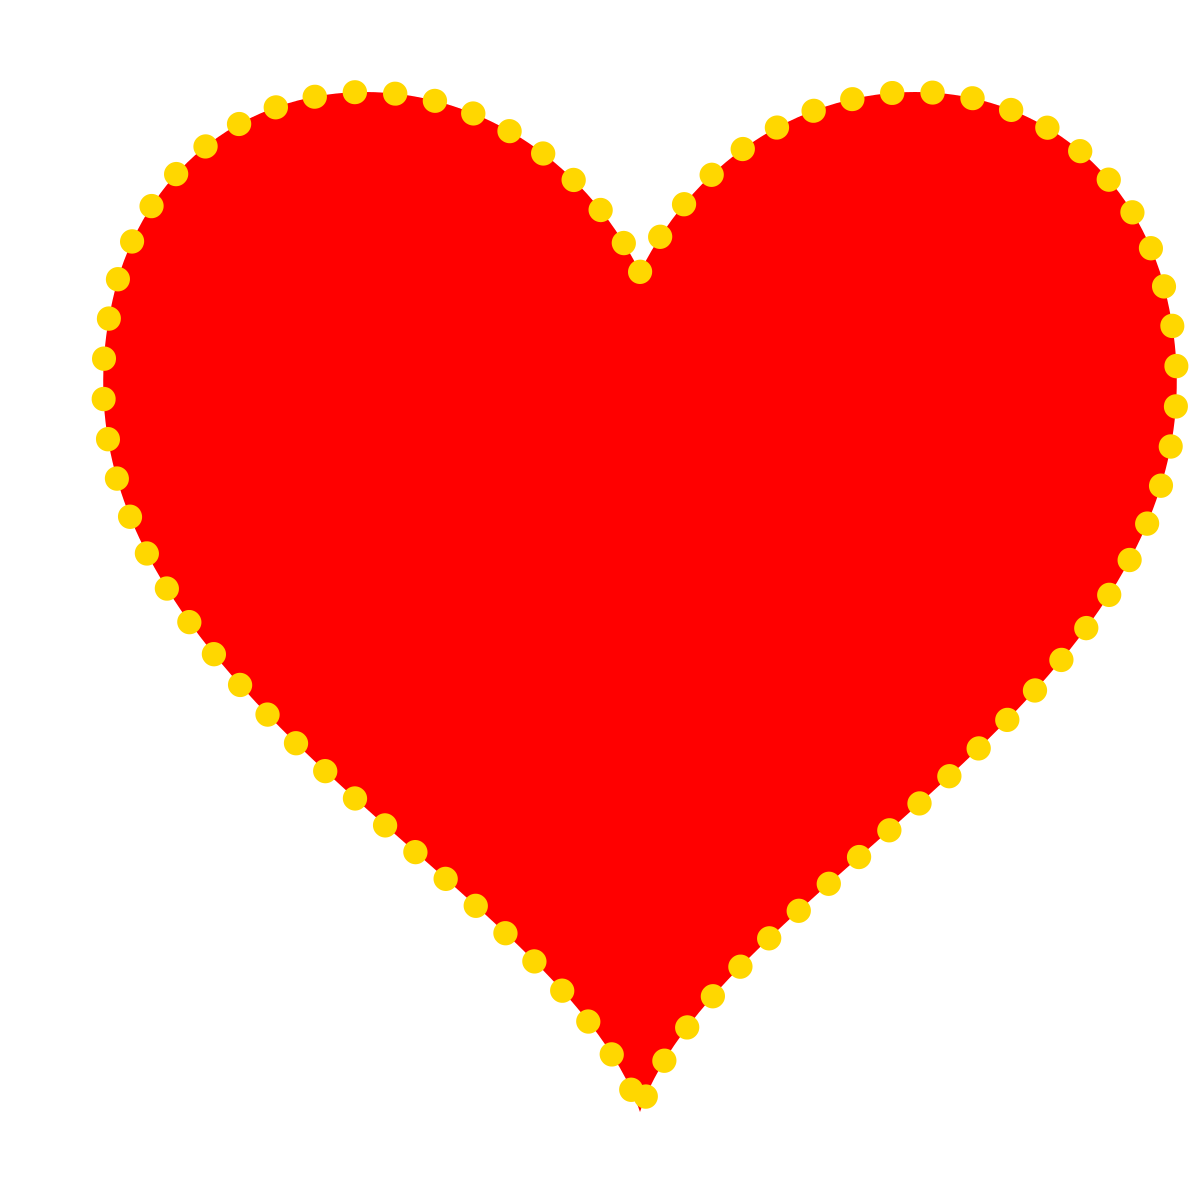 Download File:Animated SVG Heart.svg - Wikimedia Commons